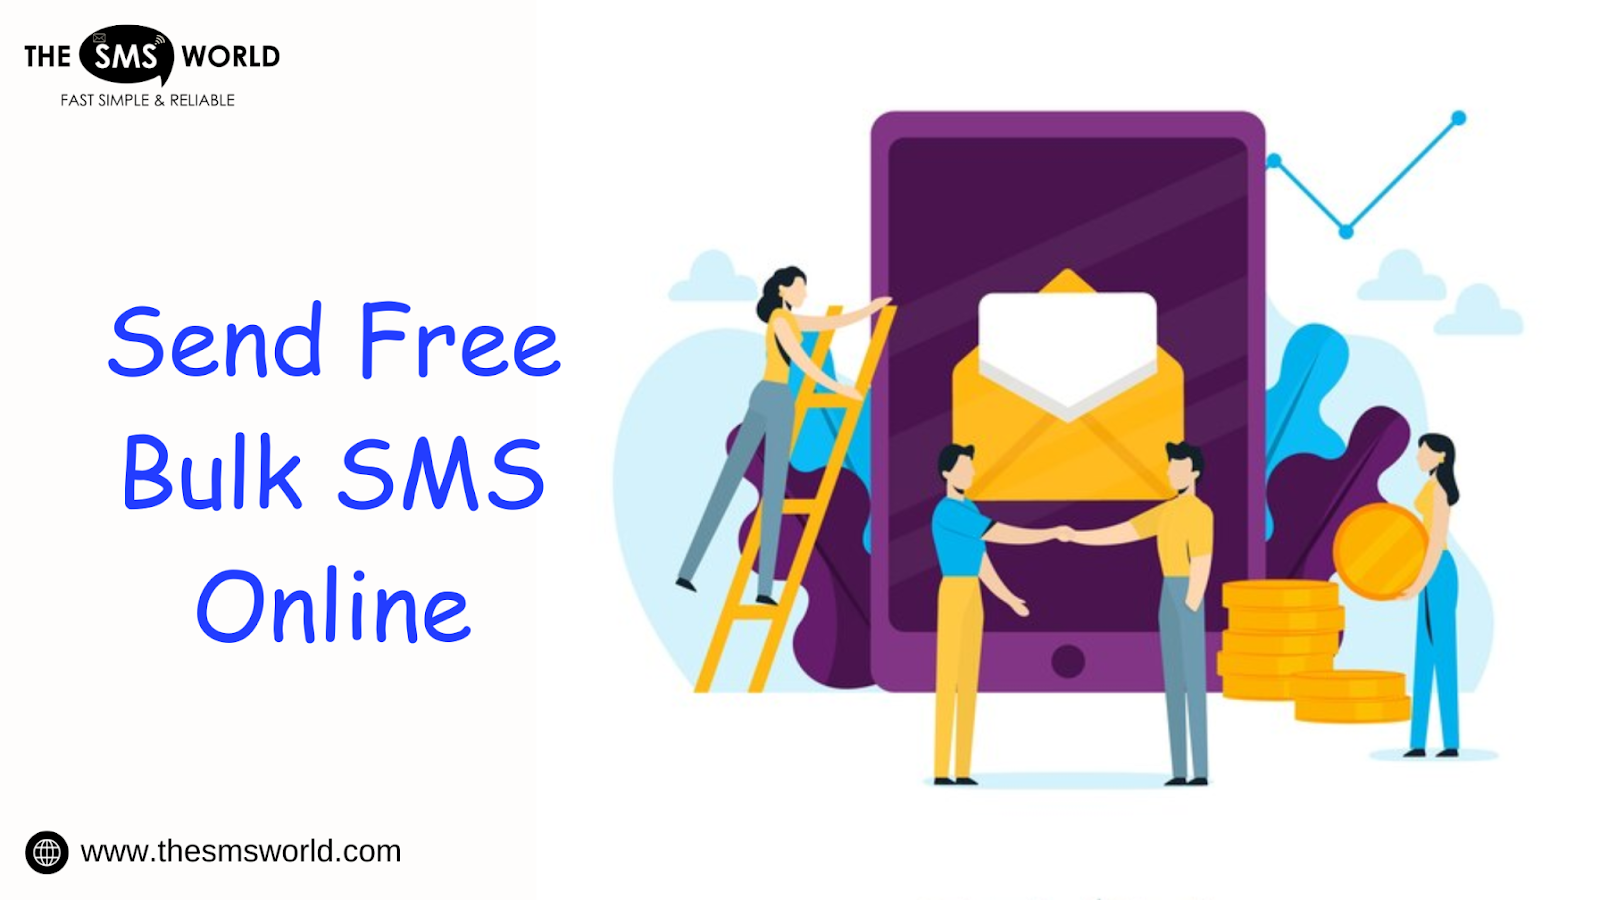 Caring Connections: Free Bulk SMS Services for Support in Tough Times